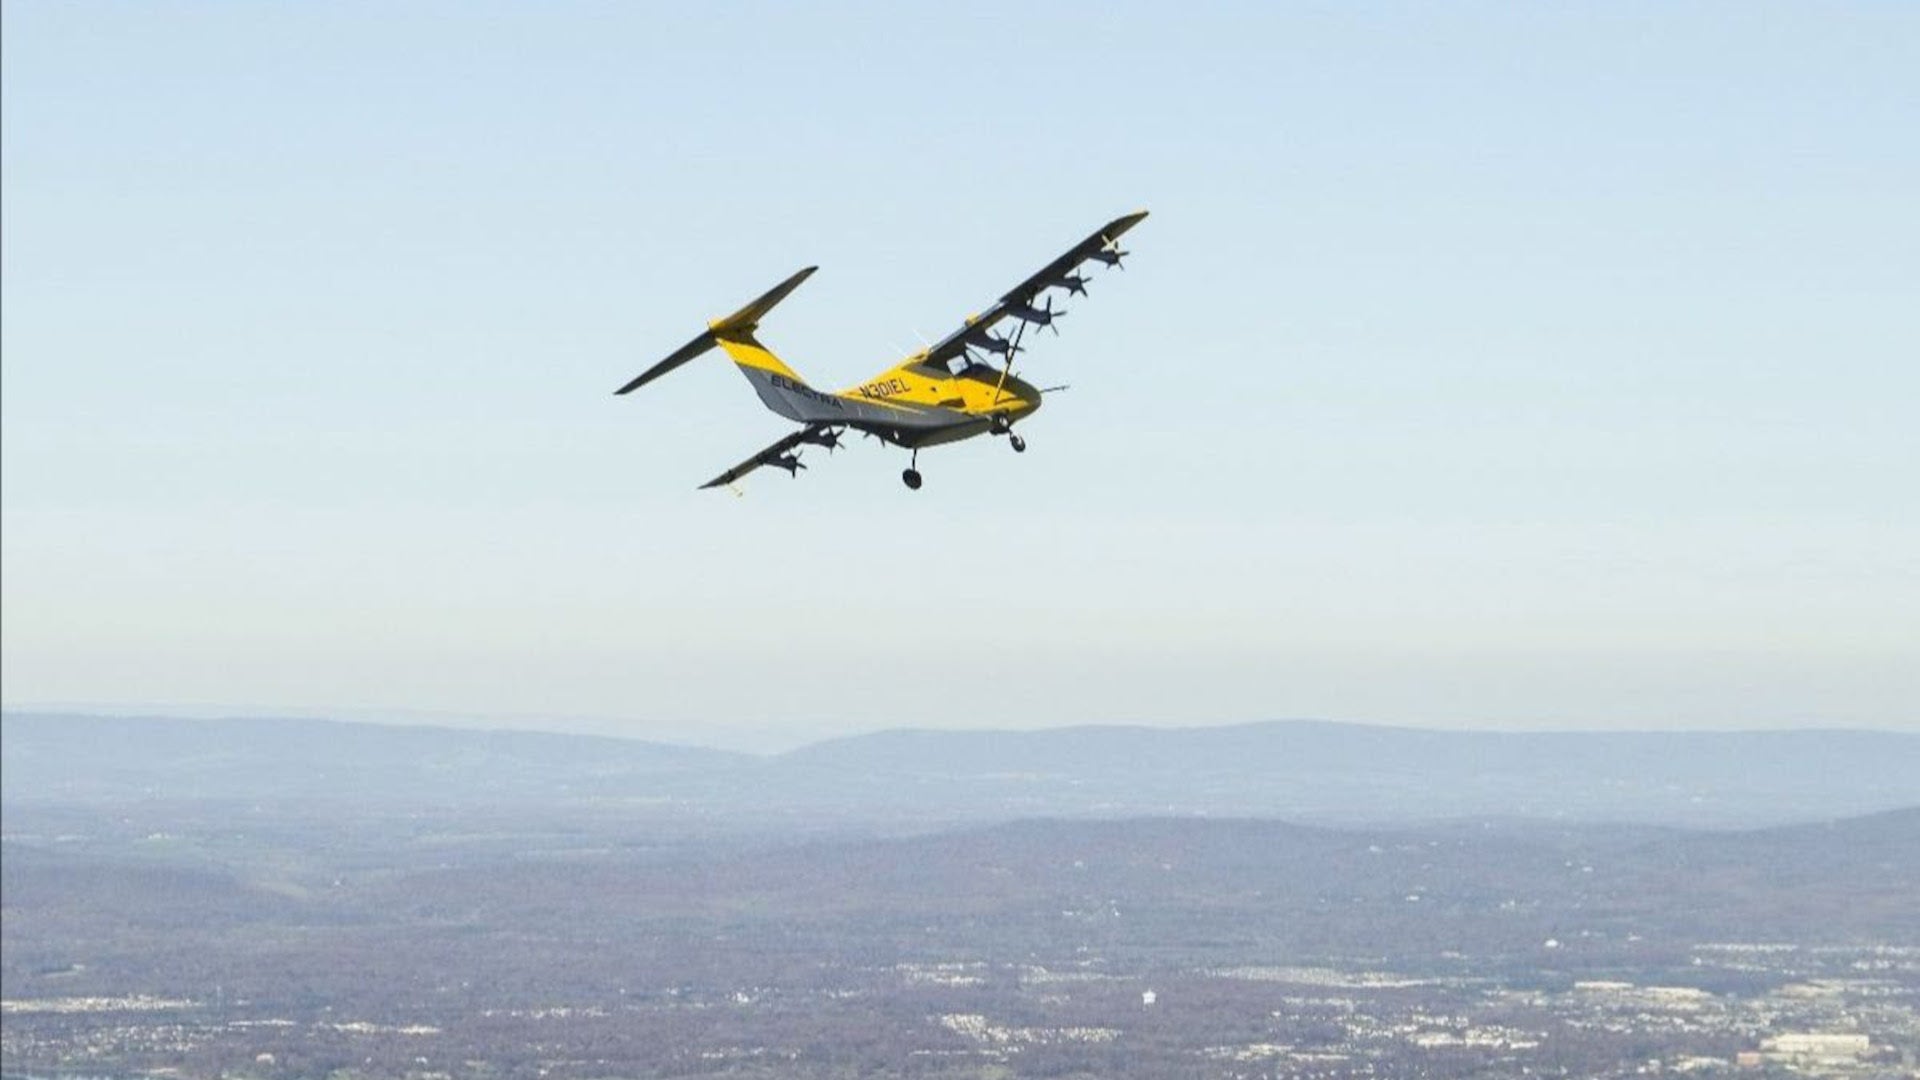 Electra Completes ‘World’s First’ Flight of Hybrid-Electric STOL Design